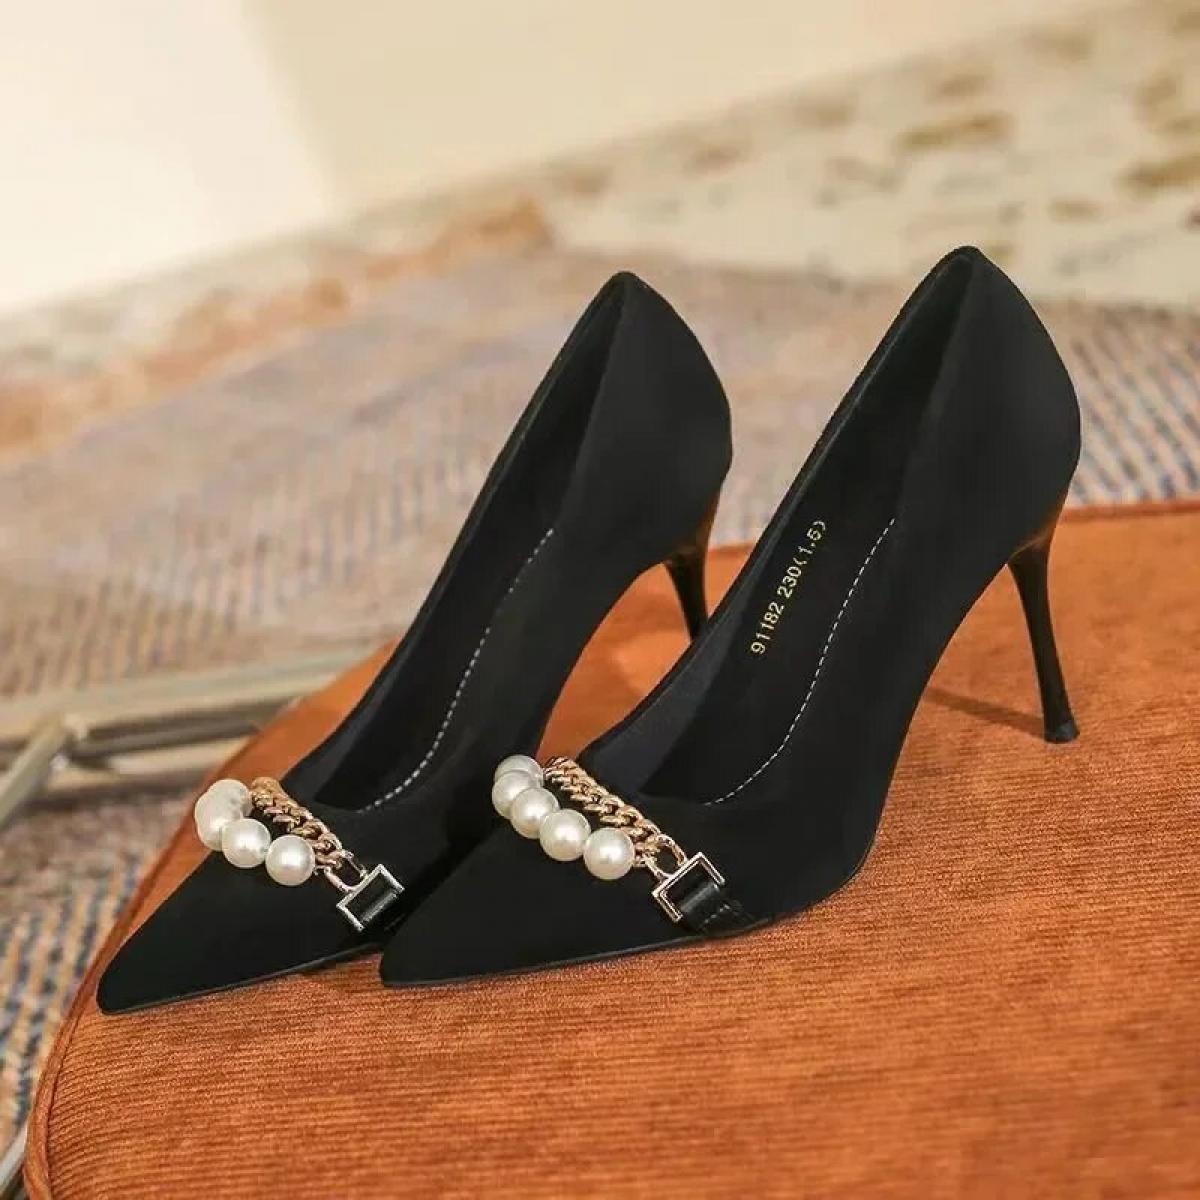 New Arrive Wedding Shoes Women Pumps Crystal Buckle Pointed Toe Single Shoes Thin Heels Genuine Leather Shoes Lady